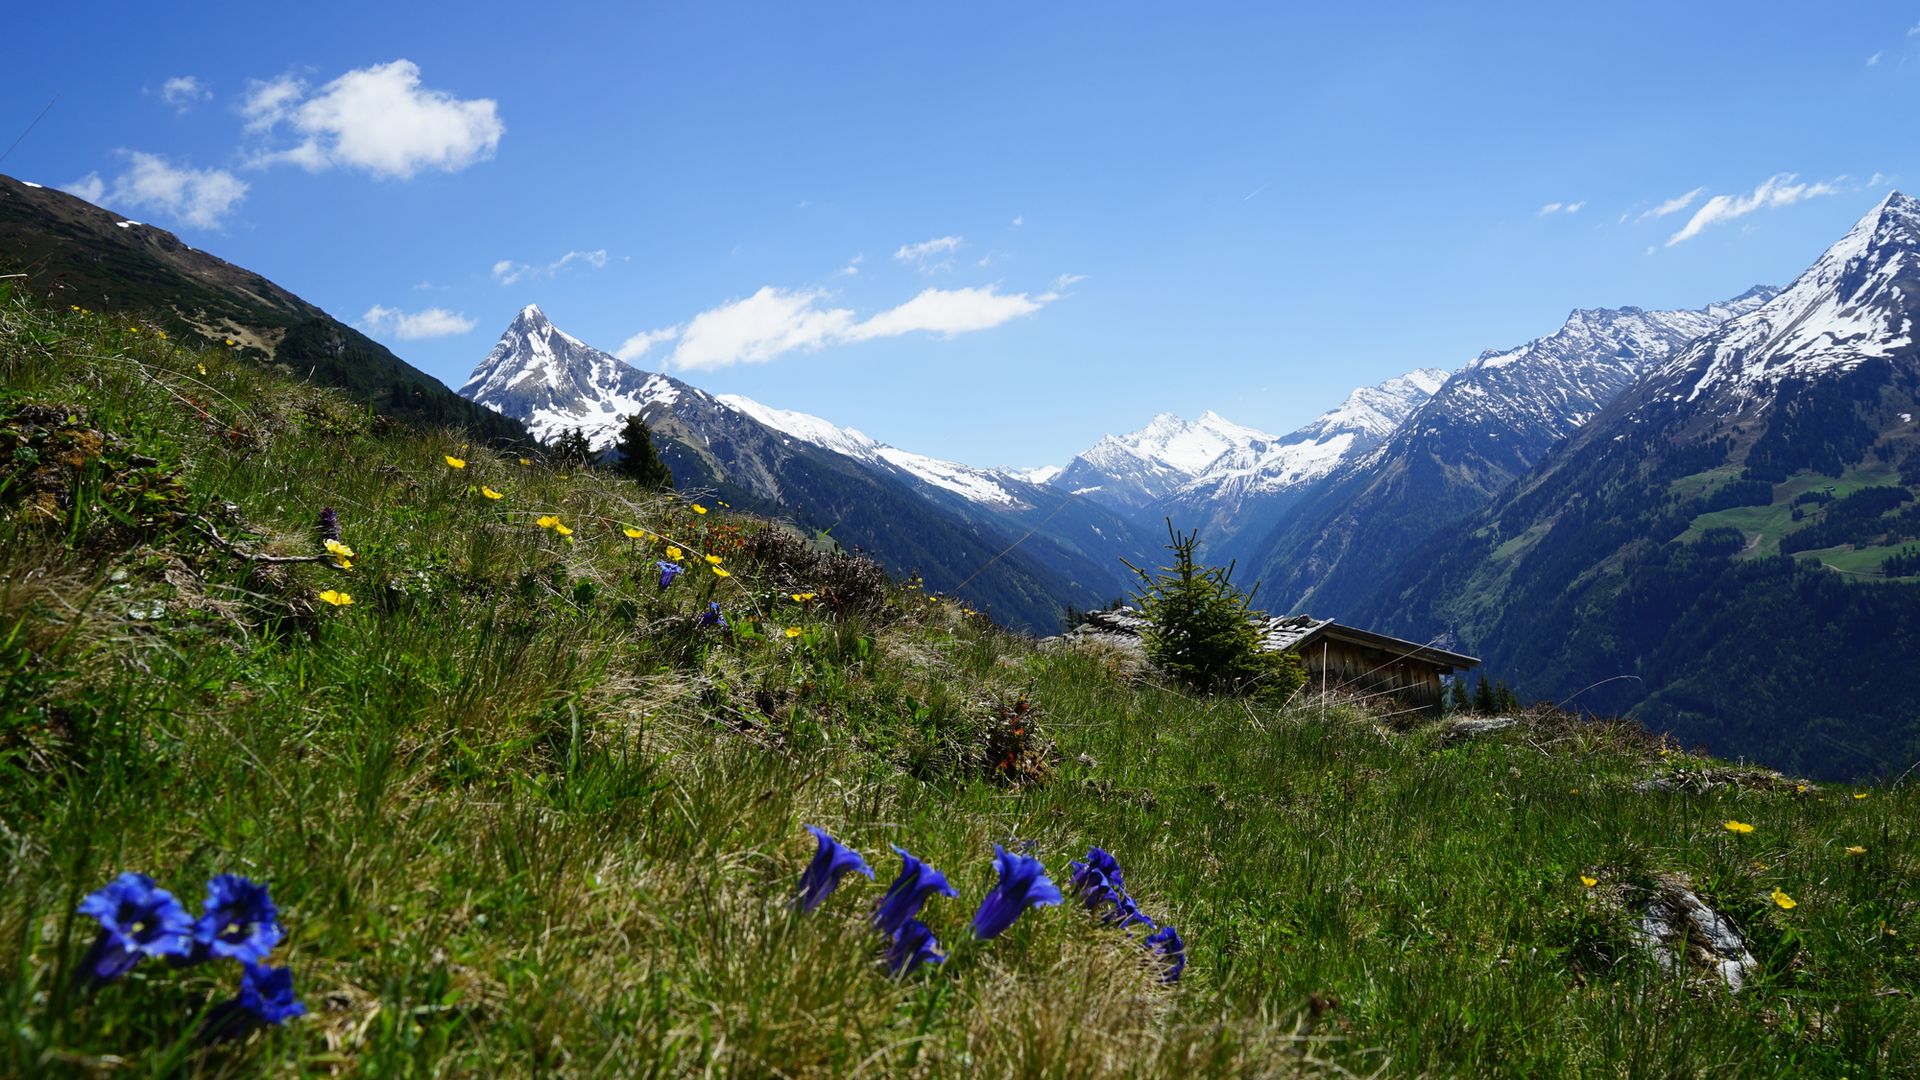  Summer landscape in the high mountain nature park Zillertal Alps